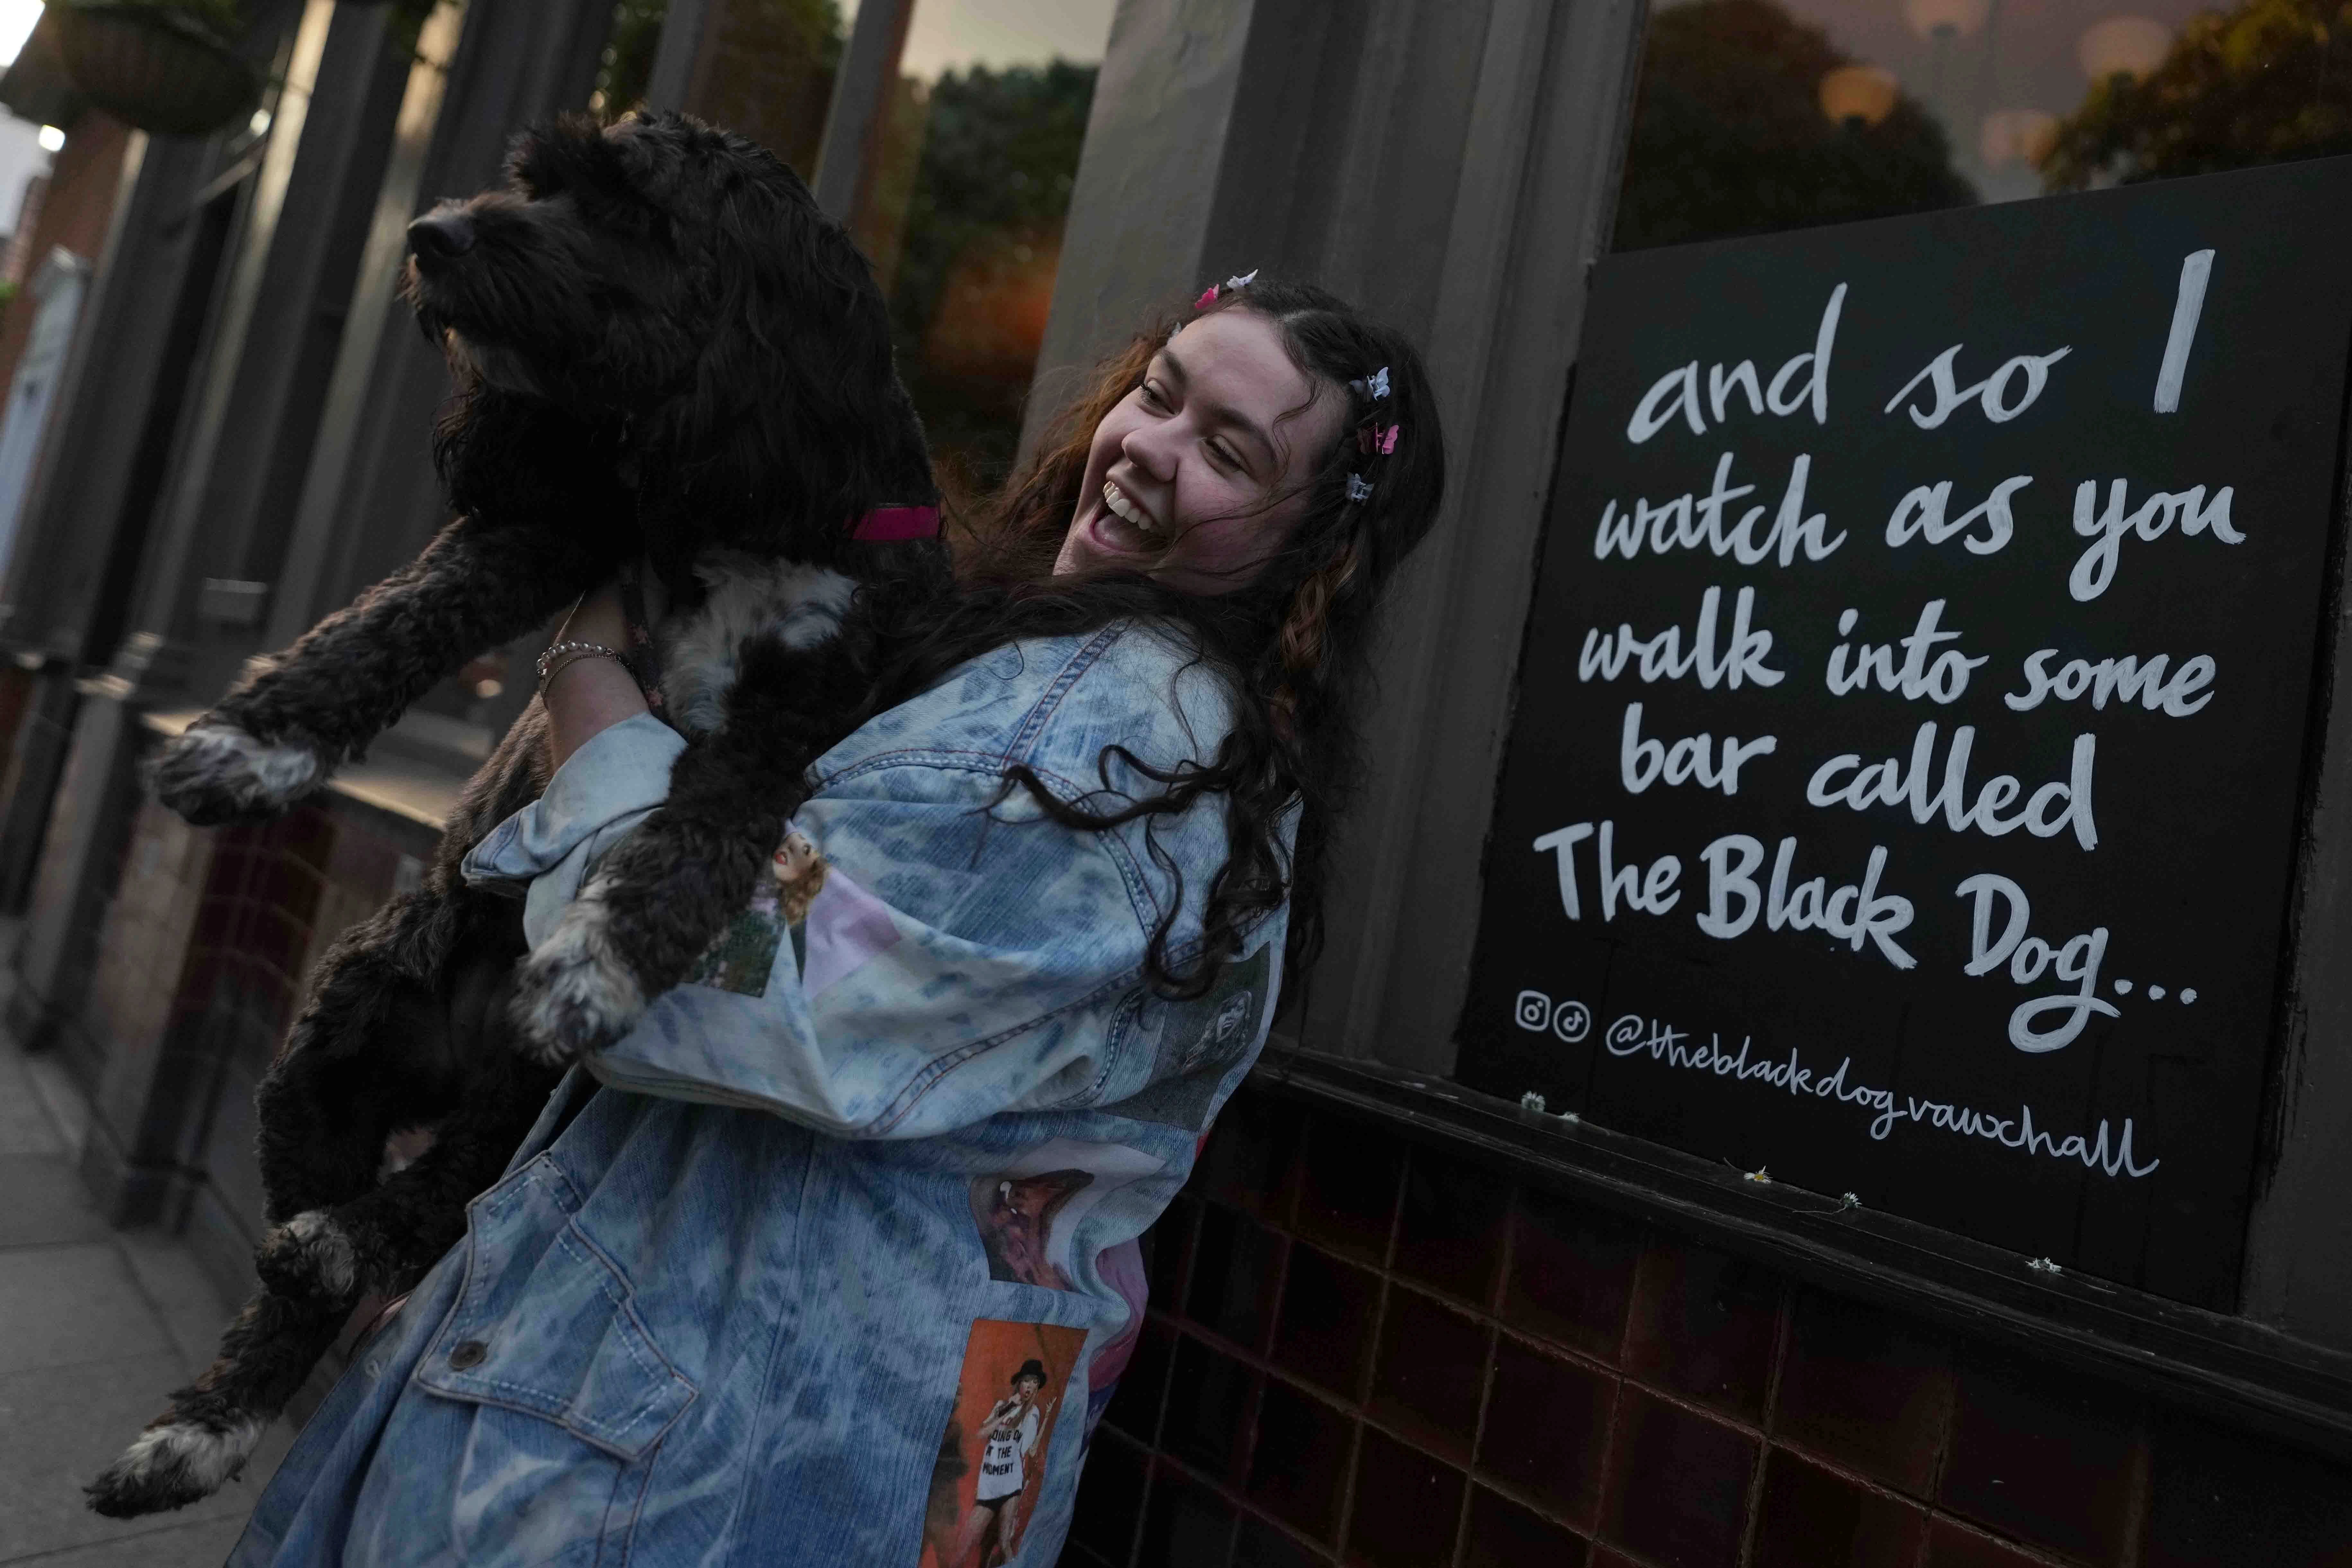 Taylor Swift fan Brodie MacArthur from east London poses with a friend's dog next to a sign featuring Taylor Swift lyrics outside The Black Dog pub in Vauxhall, London